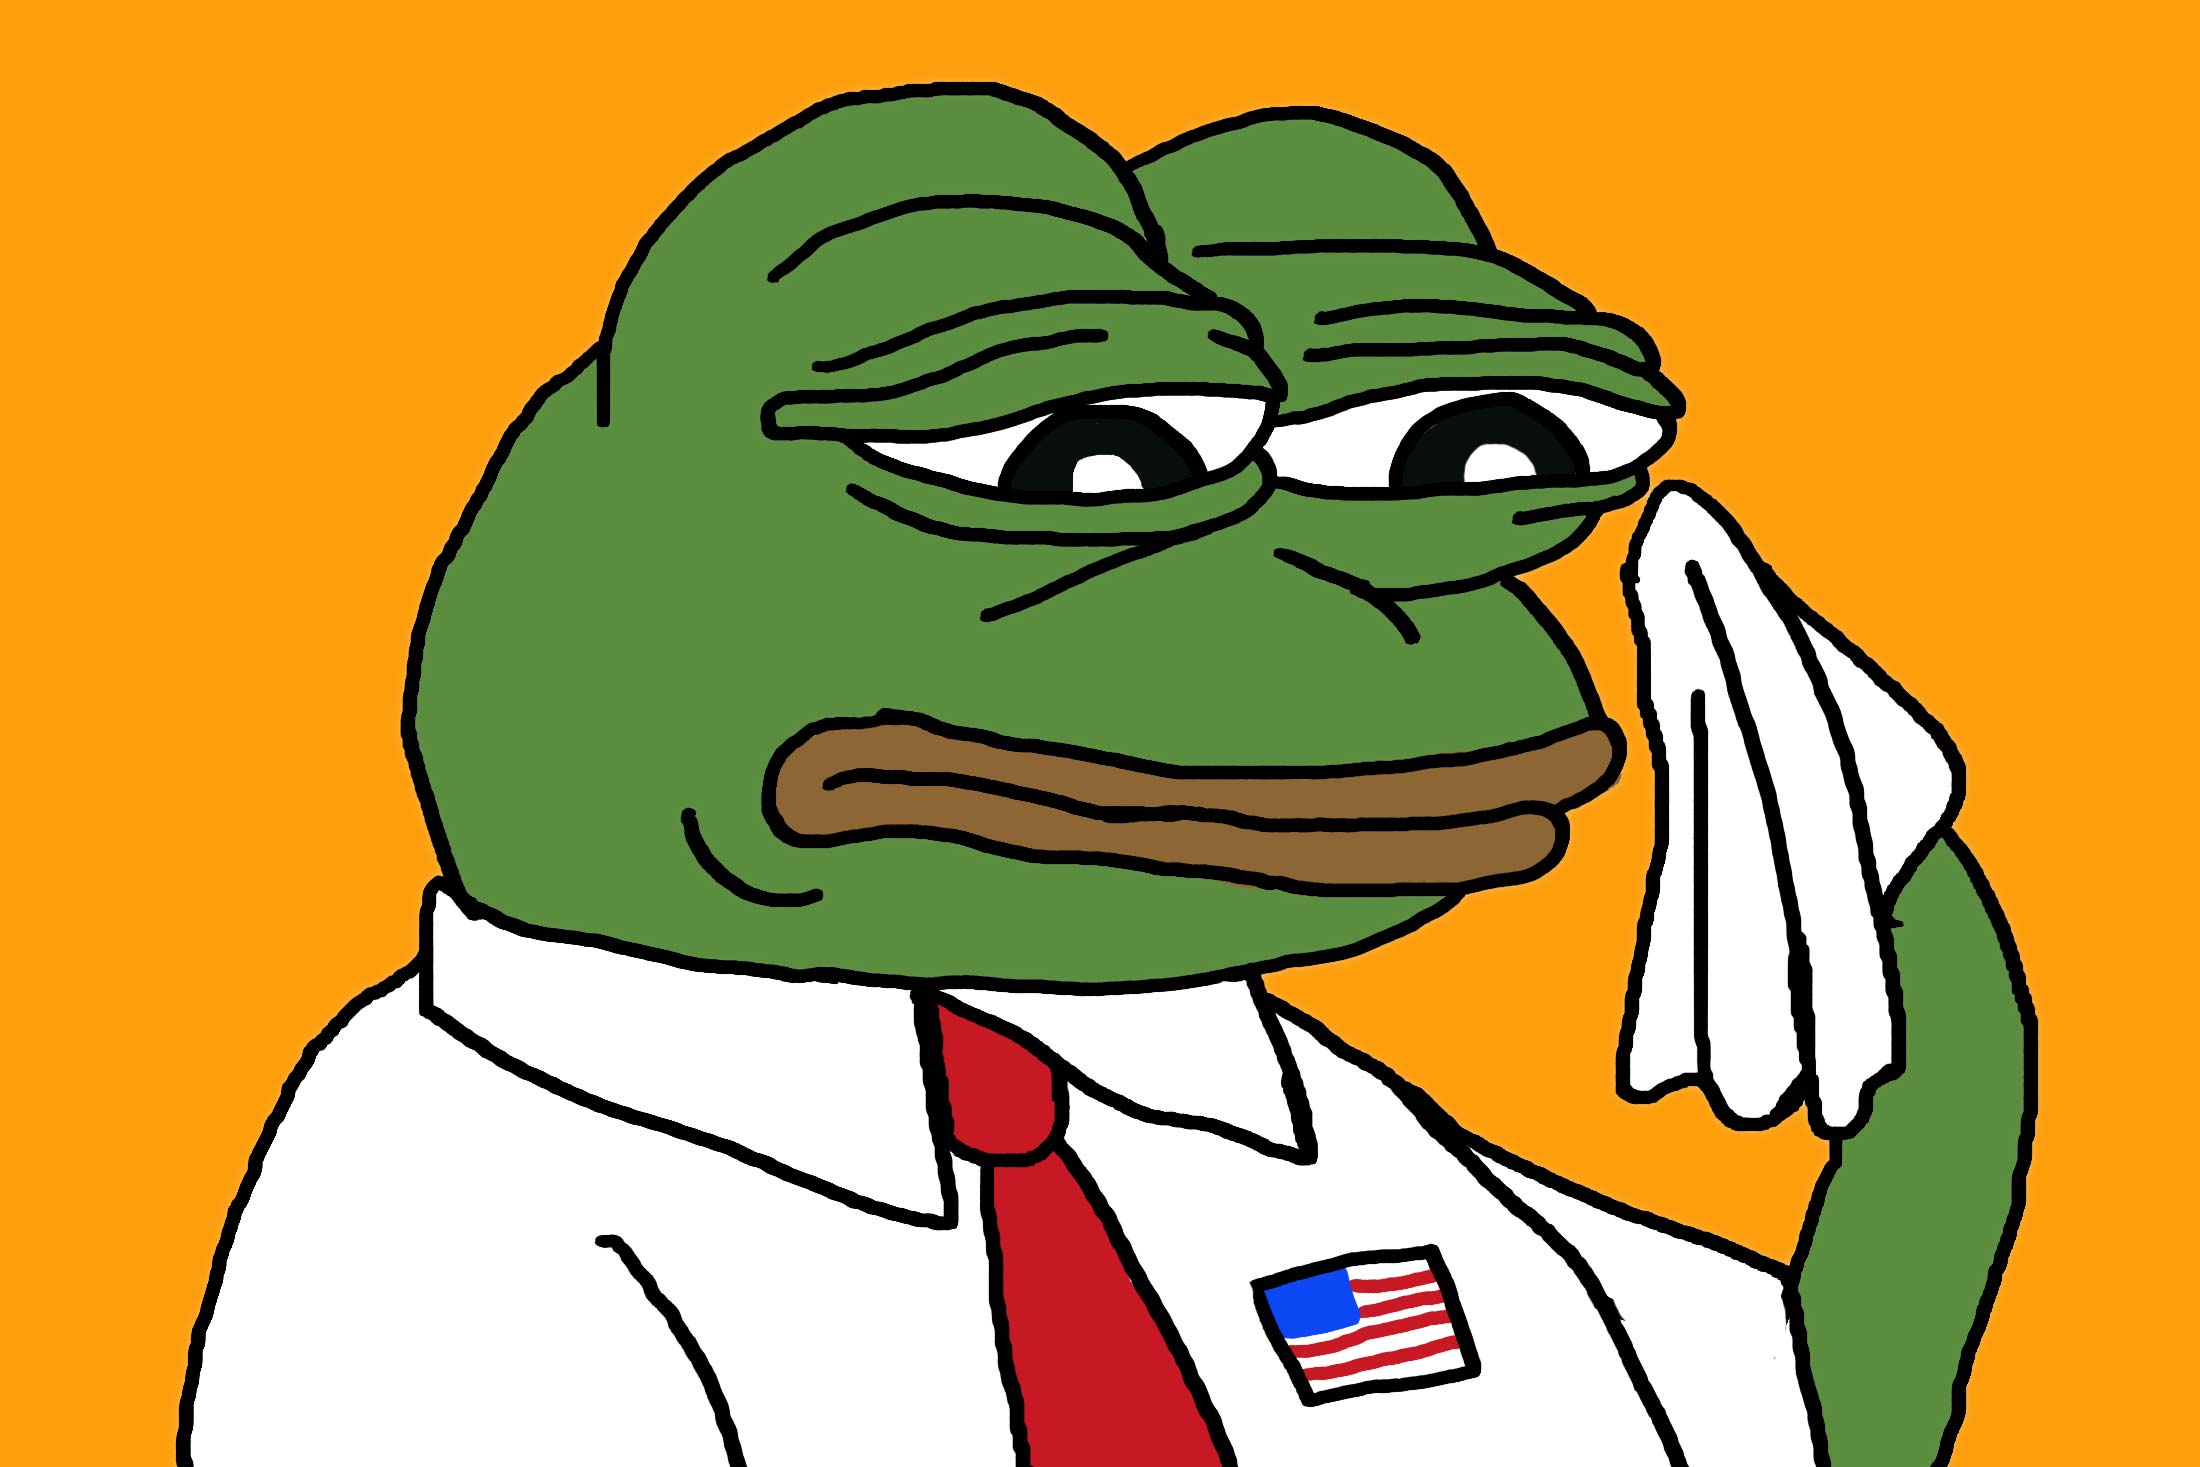 Pepe the Frog in a tie.